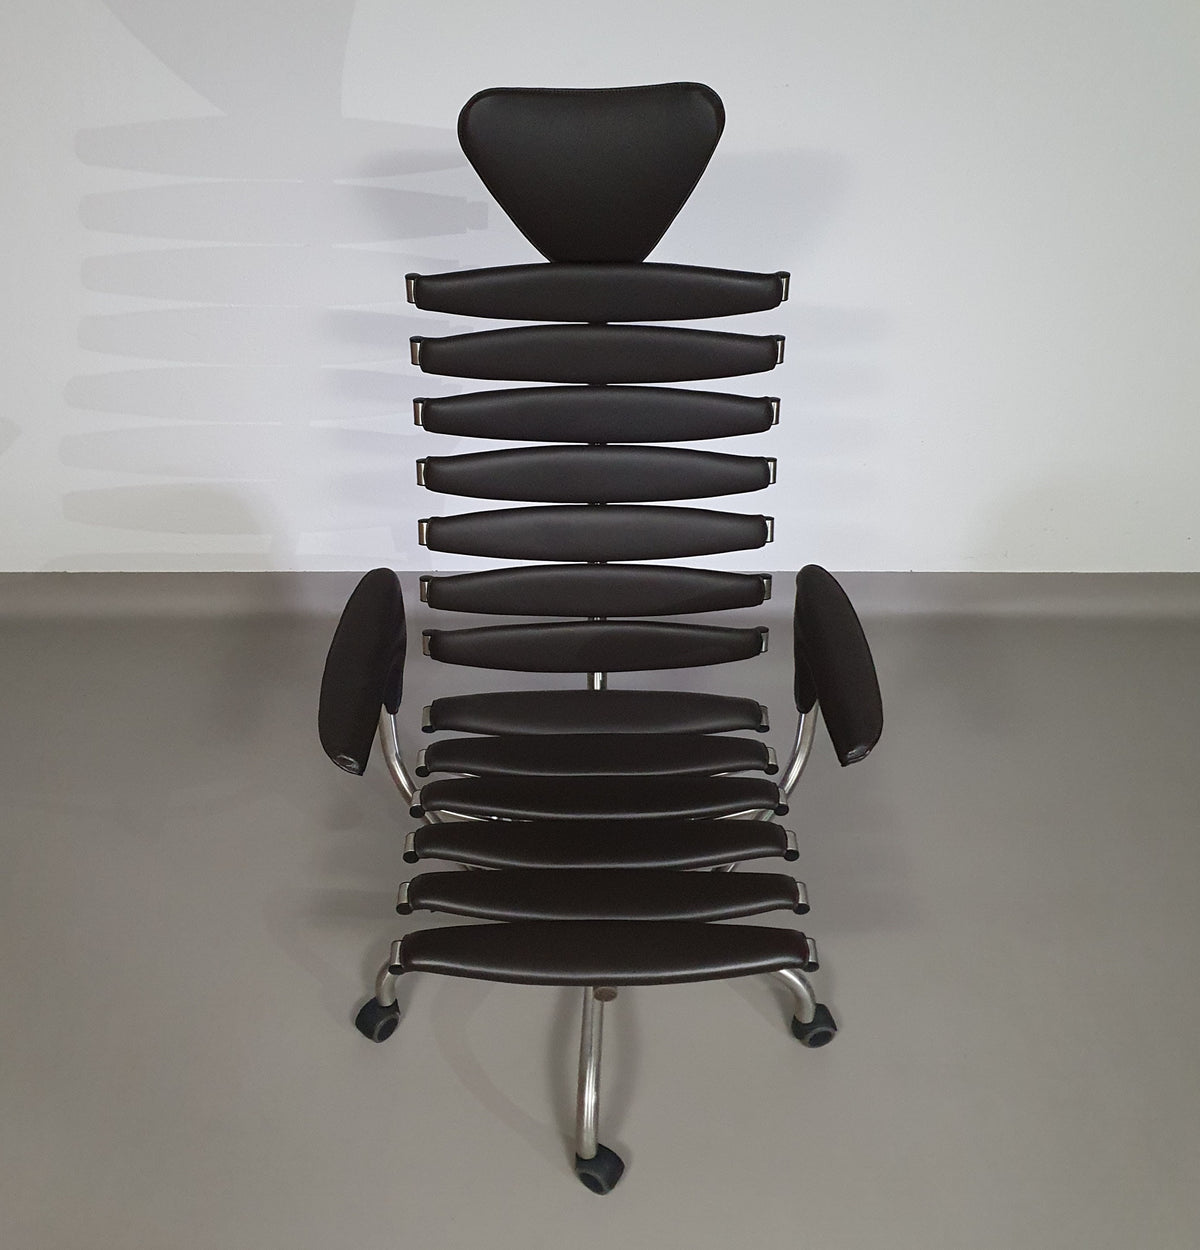 De Sede DS-2100/161 Executive Chair from our designer Home Office collection.
Mint condition 
Dark brown leather